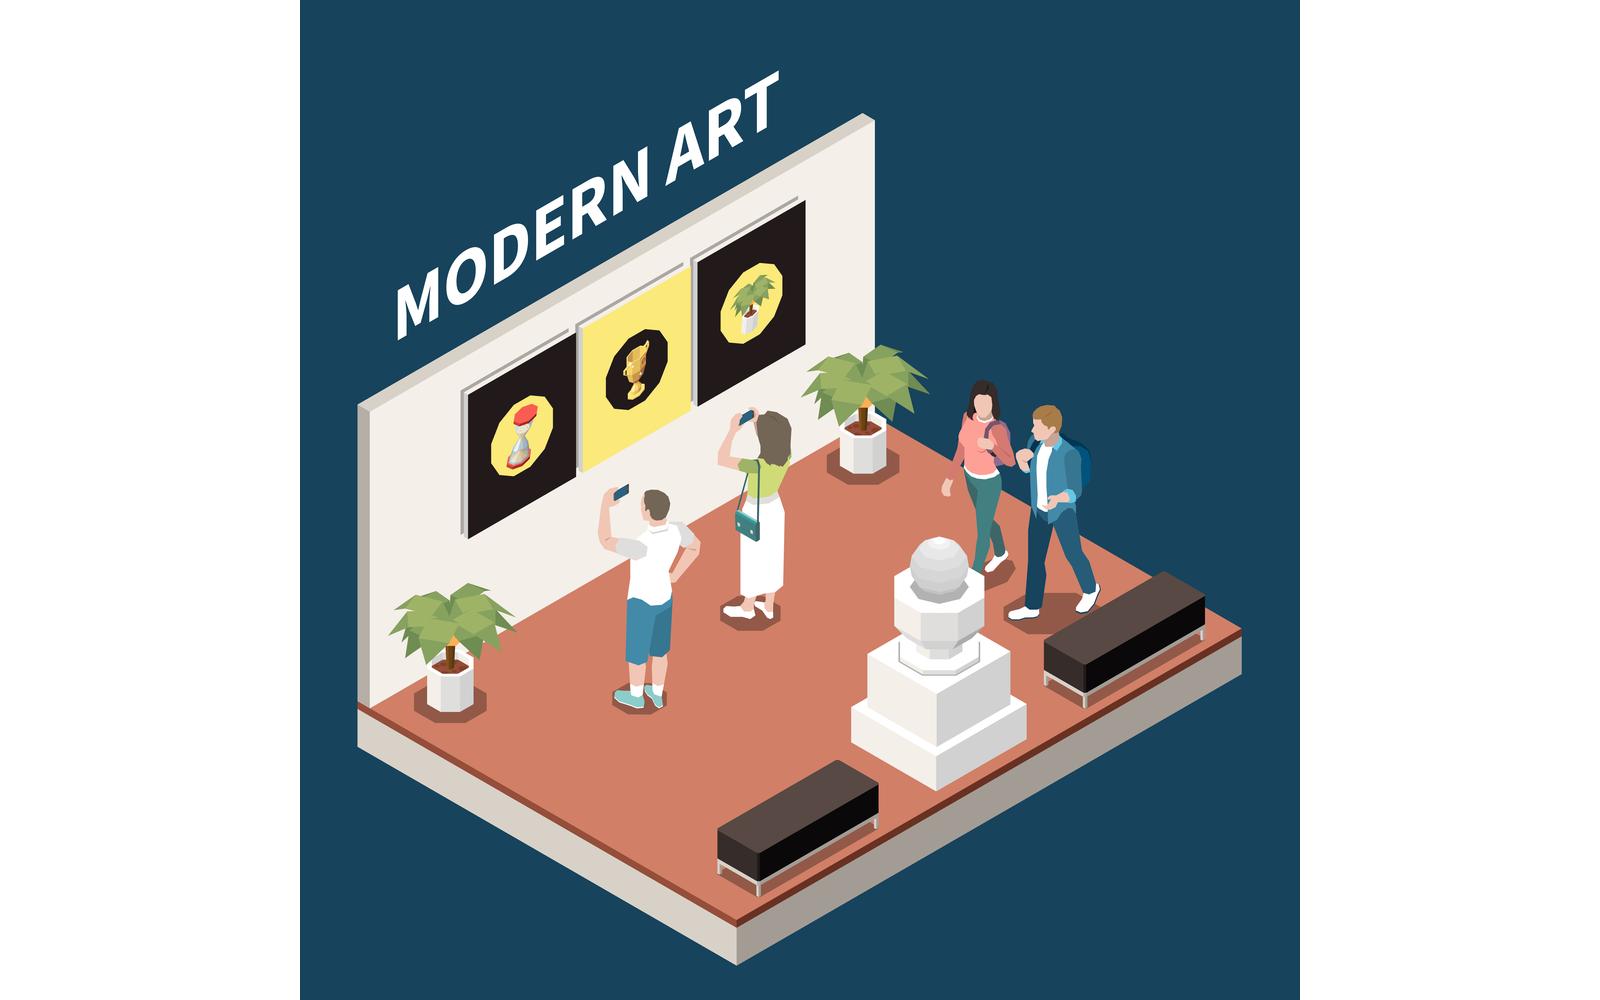 Art Gallery Exhibition Modern Museum Isometric 200810939 Vector Illustration Concept